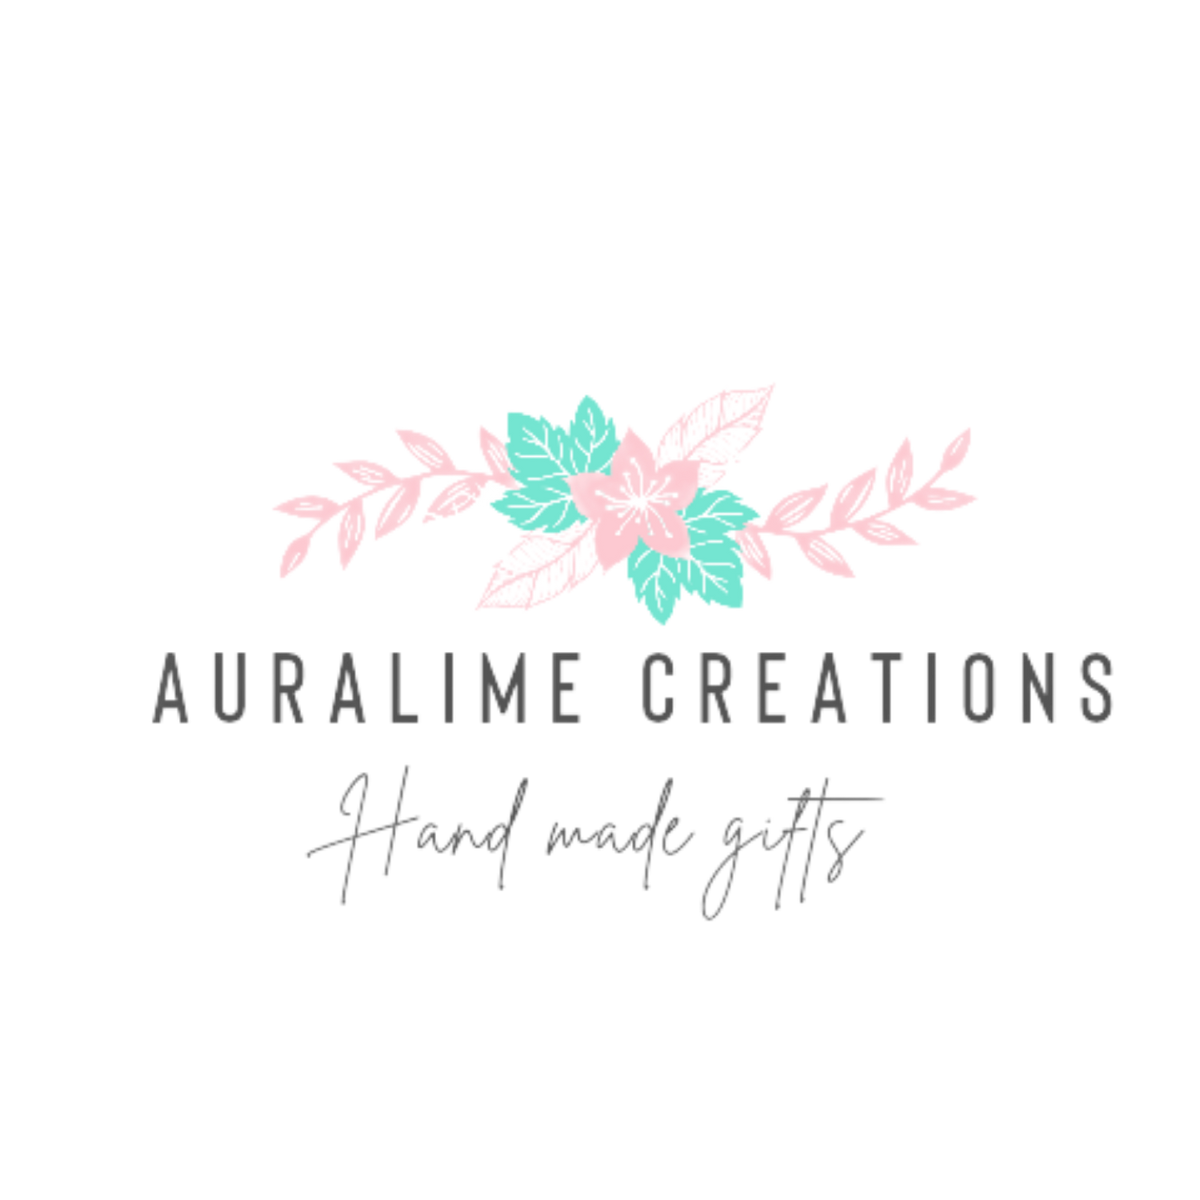 Auralime Creations, Hand made gifts